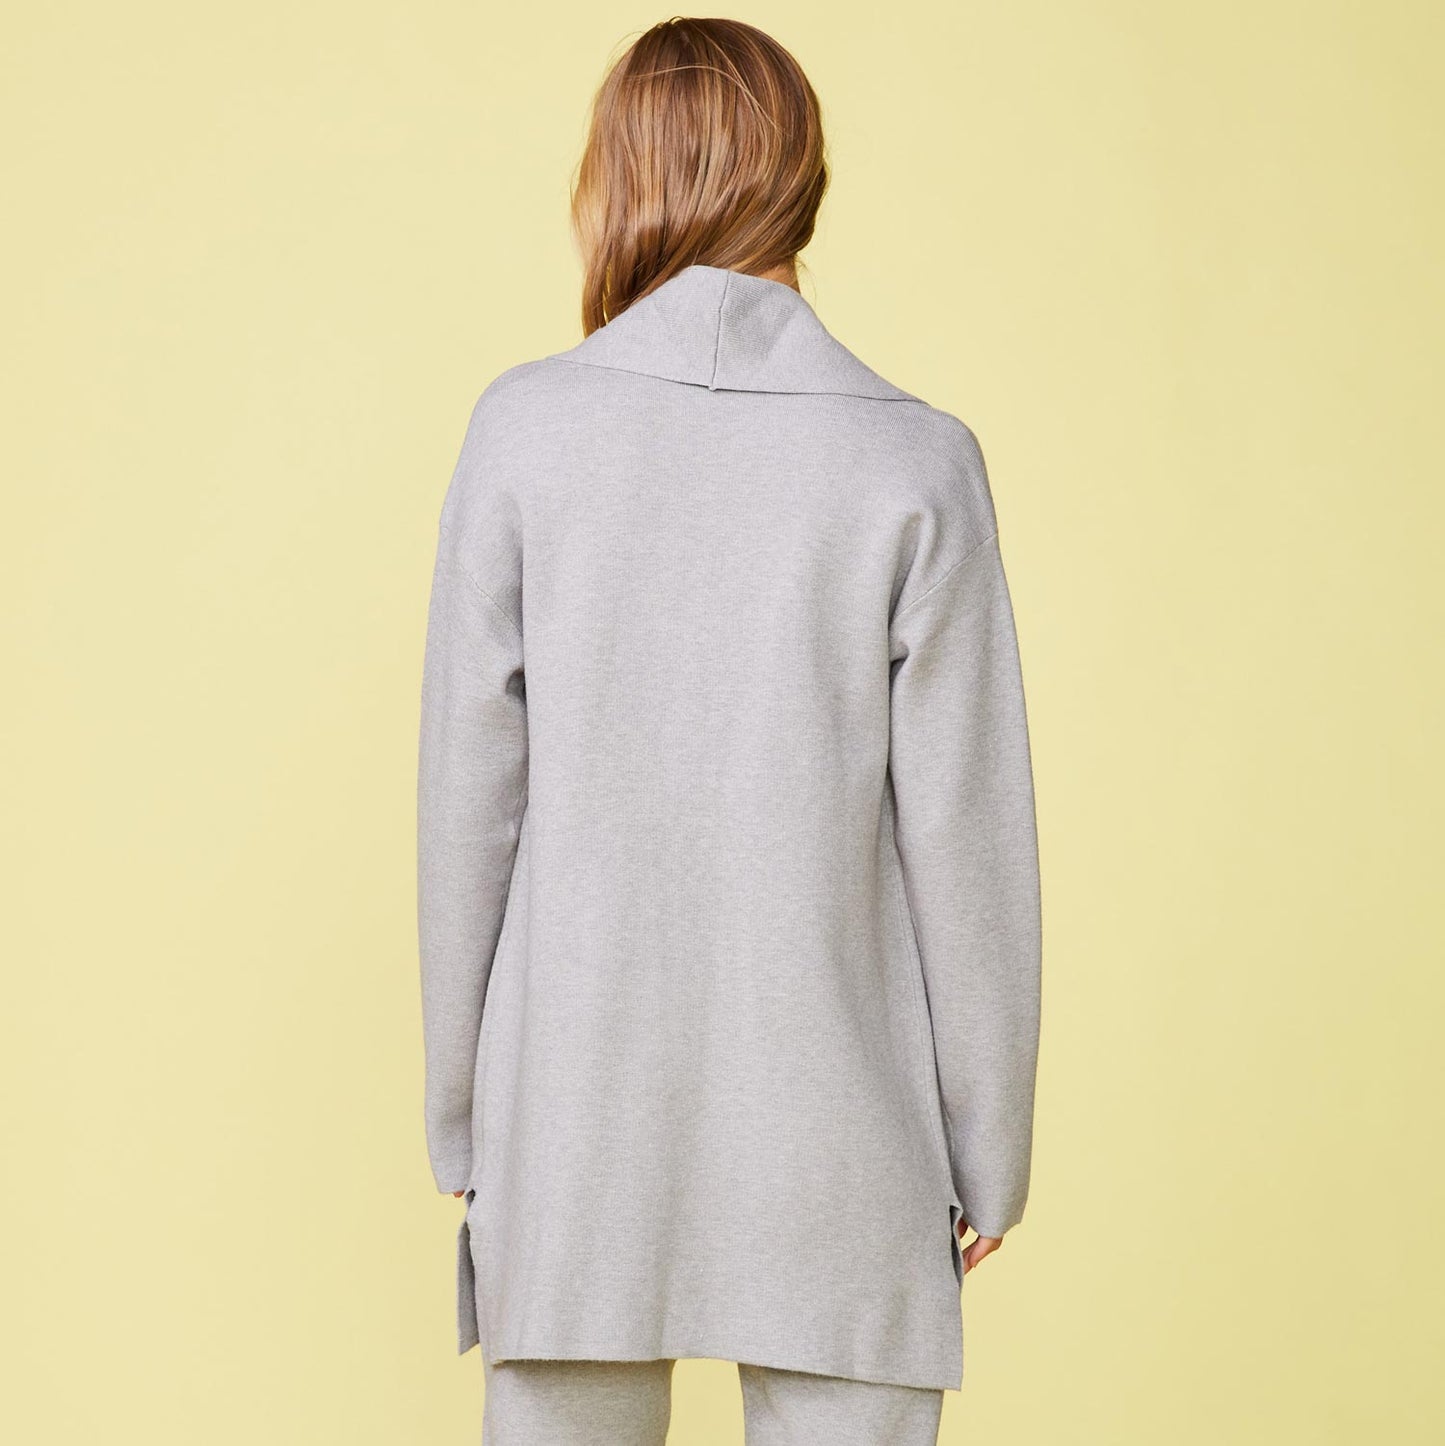 Back view of model wearing the Supersoft Sweater Knit Cardigan in Heather Grey.